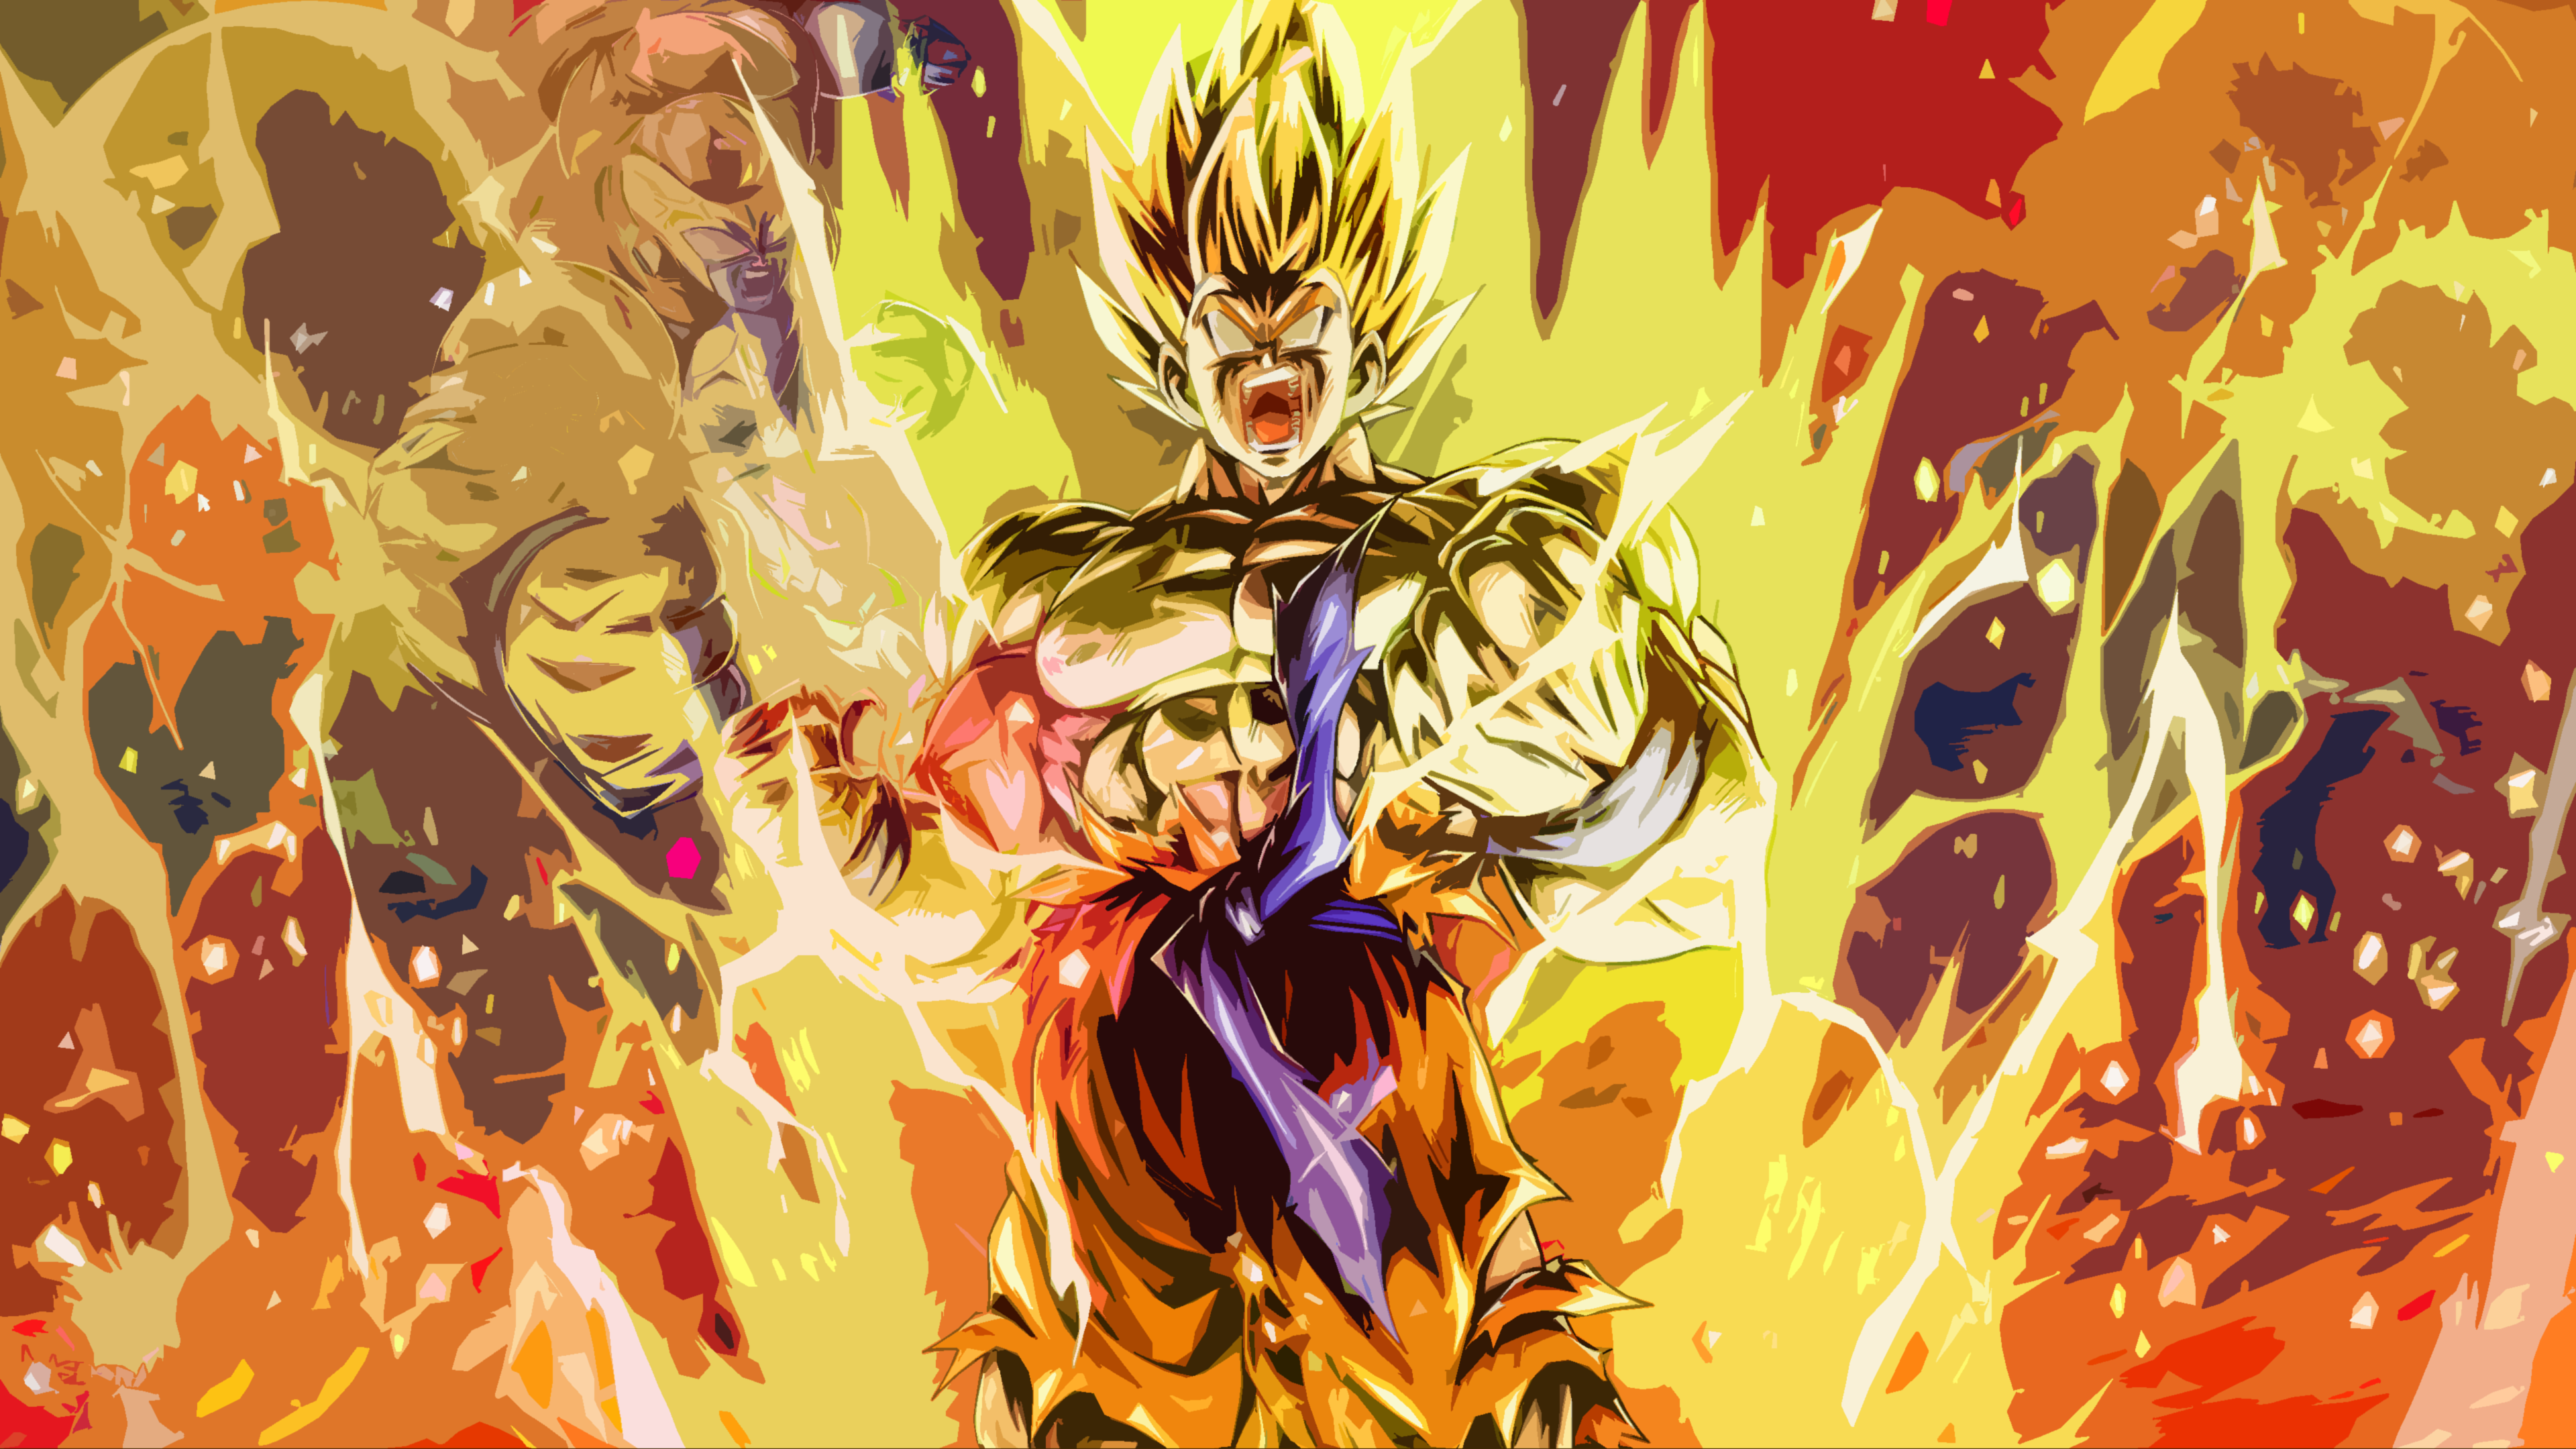 Goku Gets Angry in 4K. 3 Different Styles! 4K PC Wallpaper